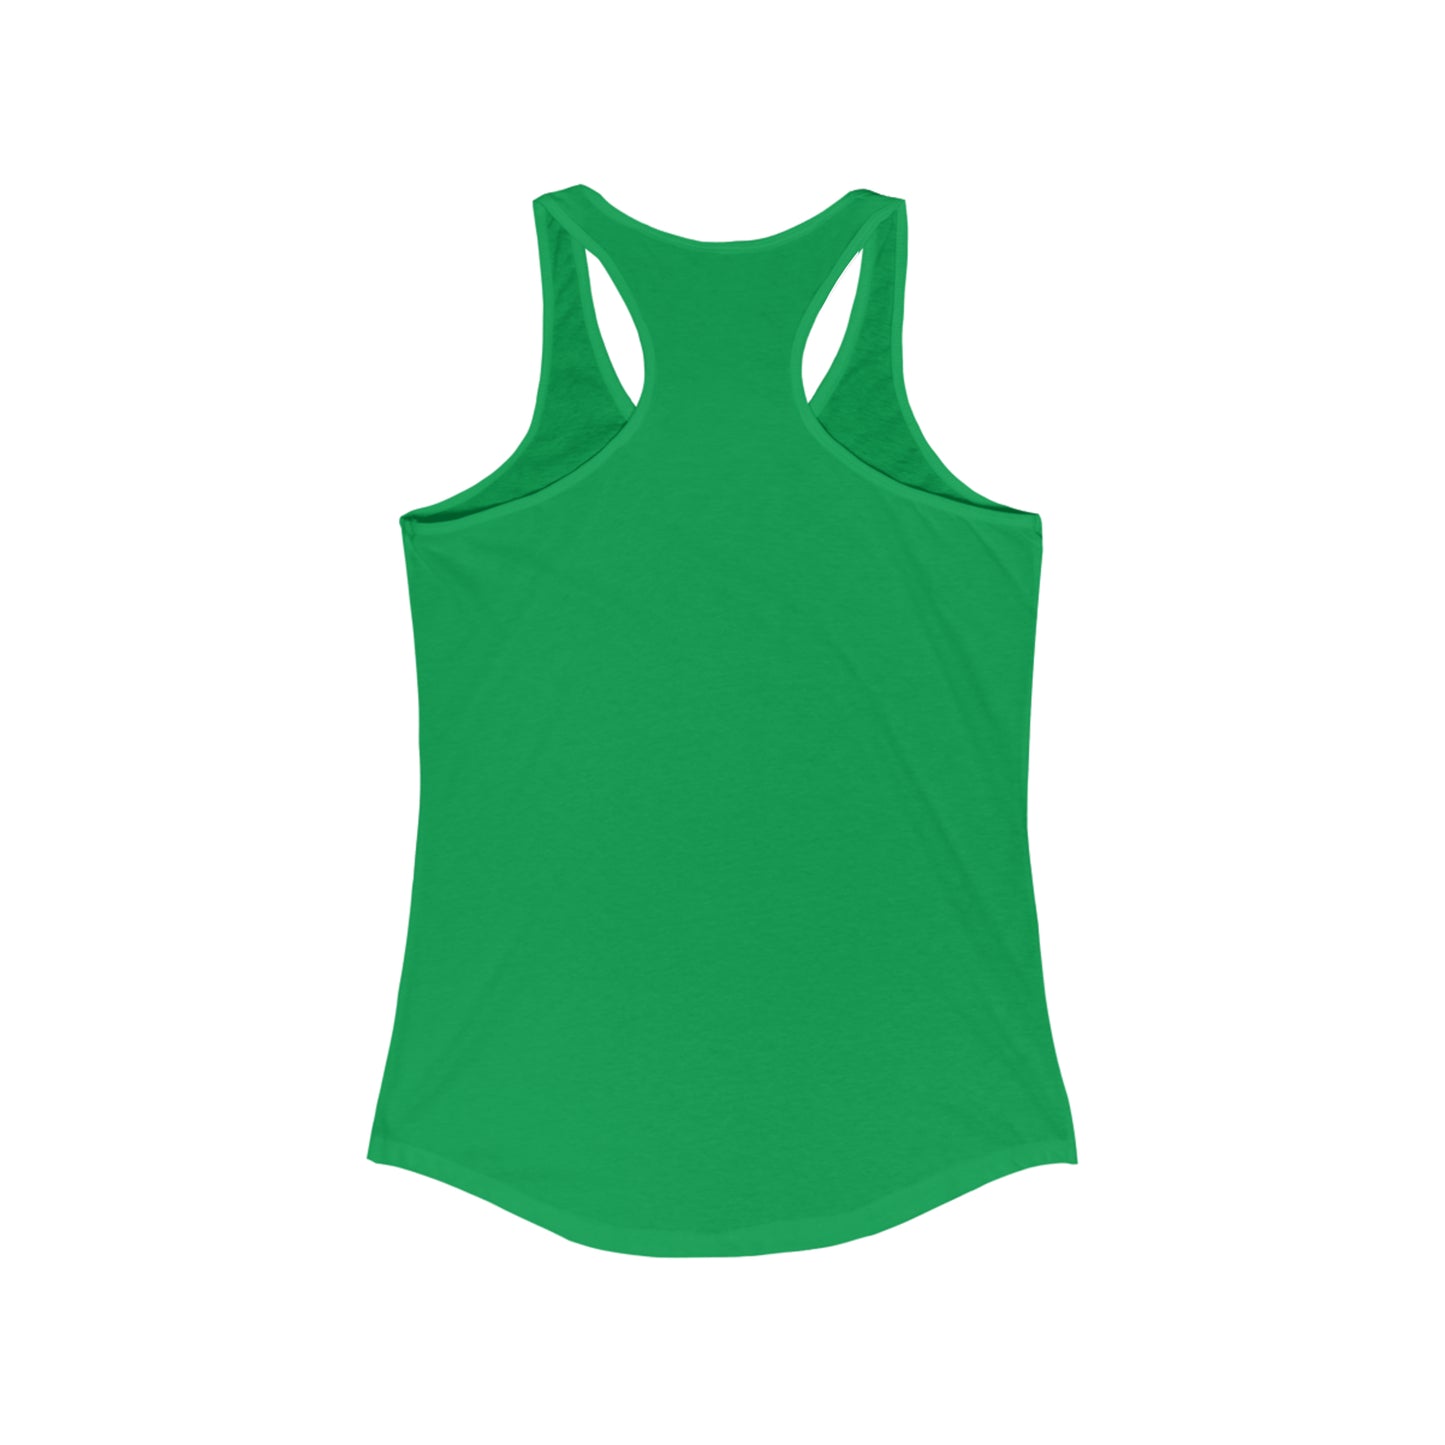 Queen Size Women's Ideal Racerback Tank for fitness gym & every day wear